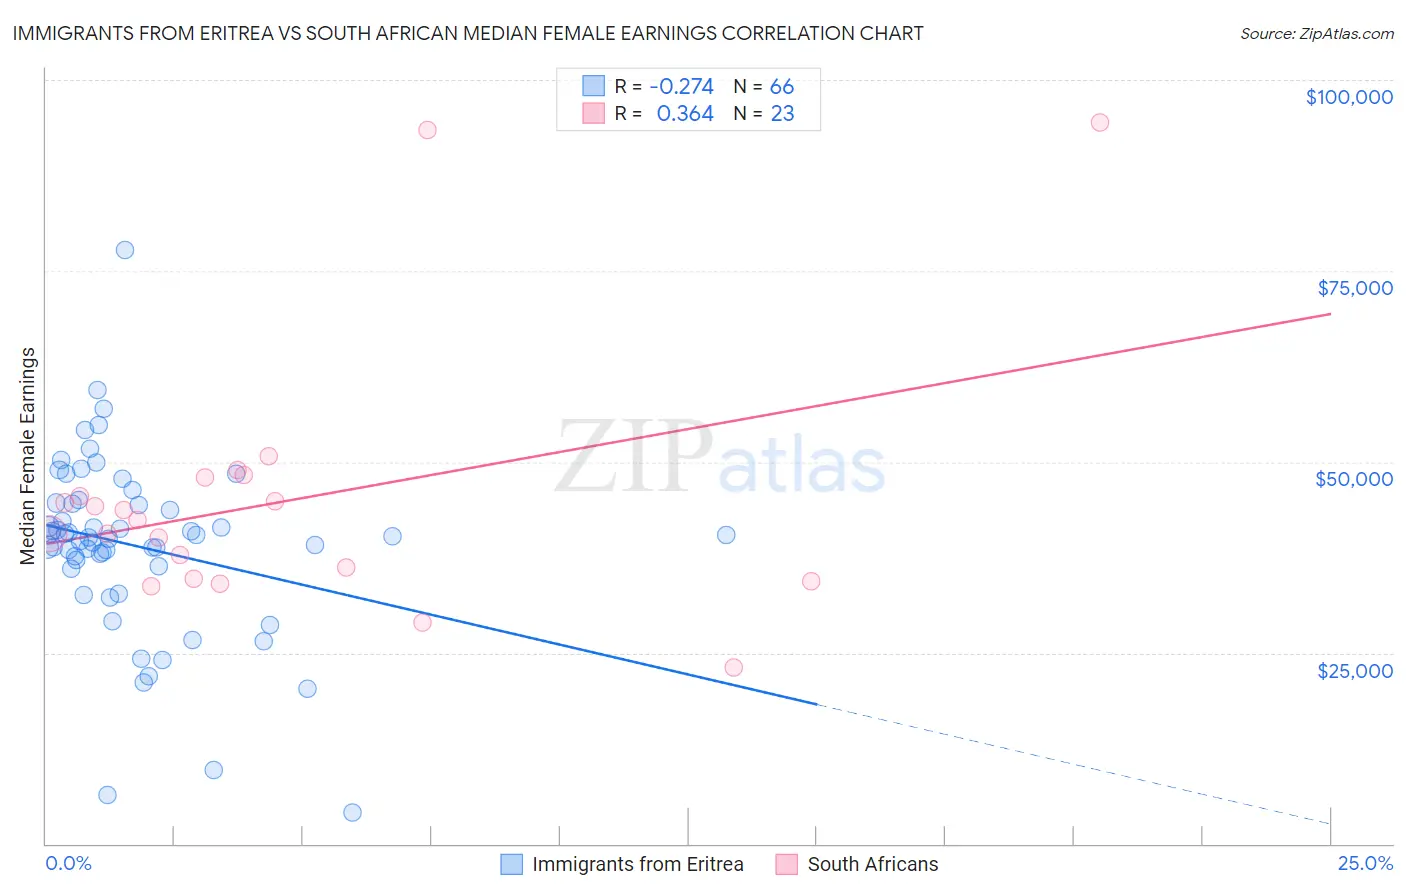 Immigrants from Eritrea vs South African Median Female Earnings